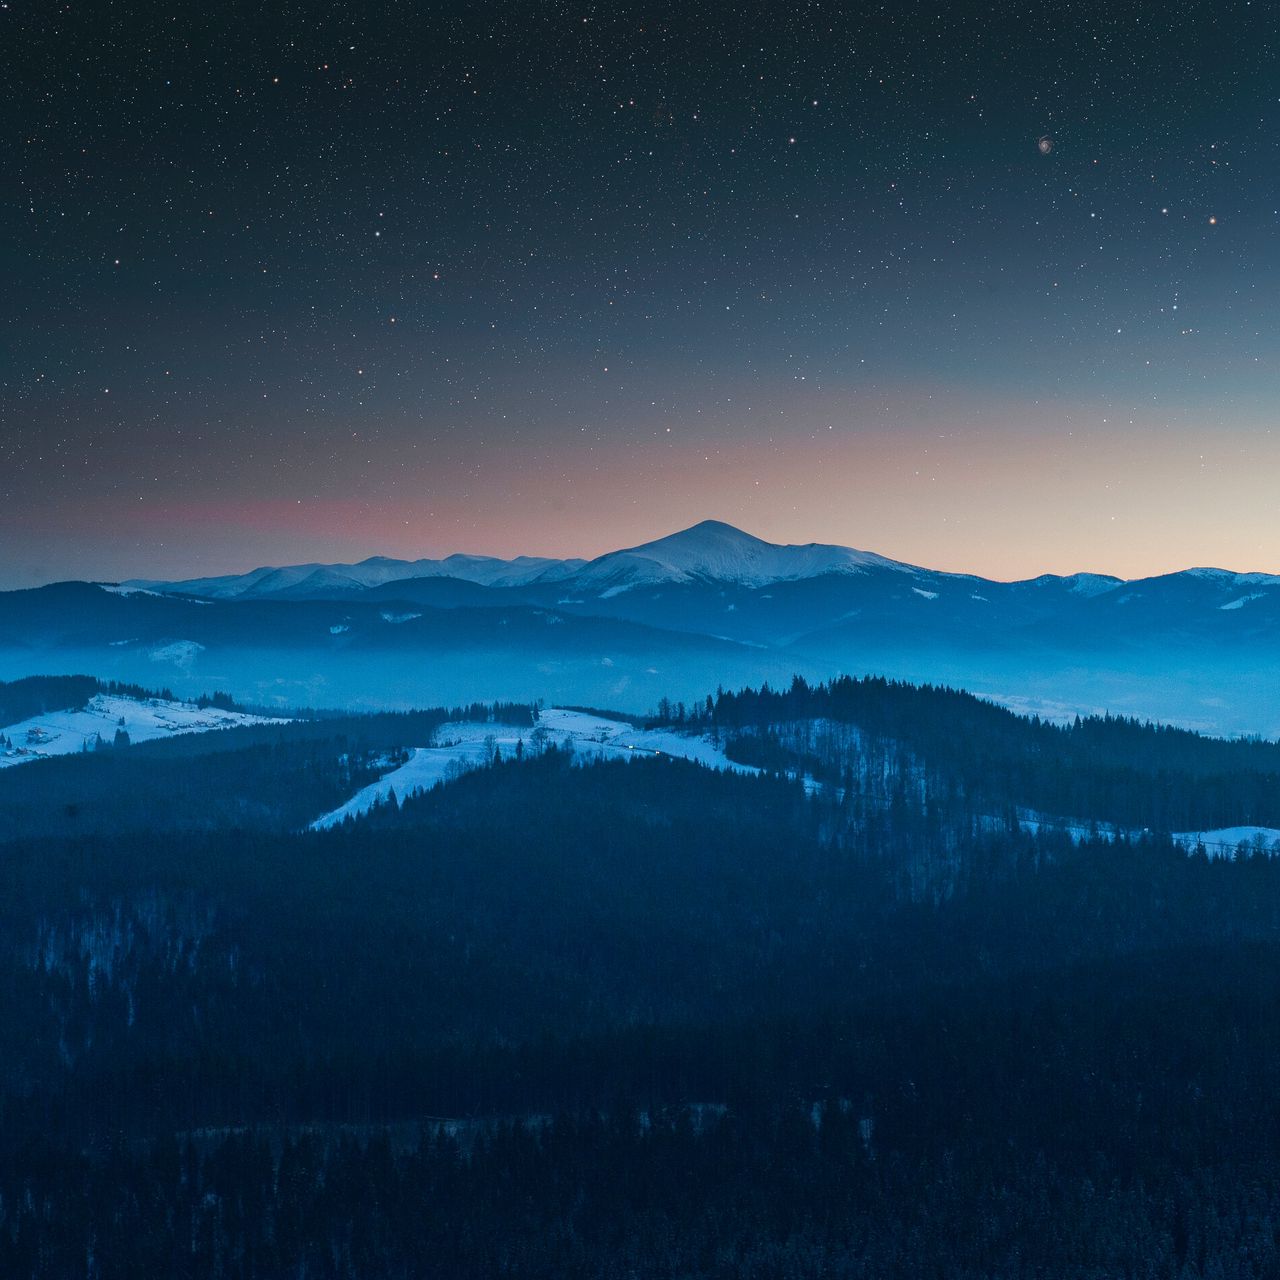 Download wallpaper 1280x1280 mountains, aerial view, starry sky, night, landscape ipad, ipad ipad mini for parallax HD background